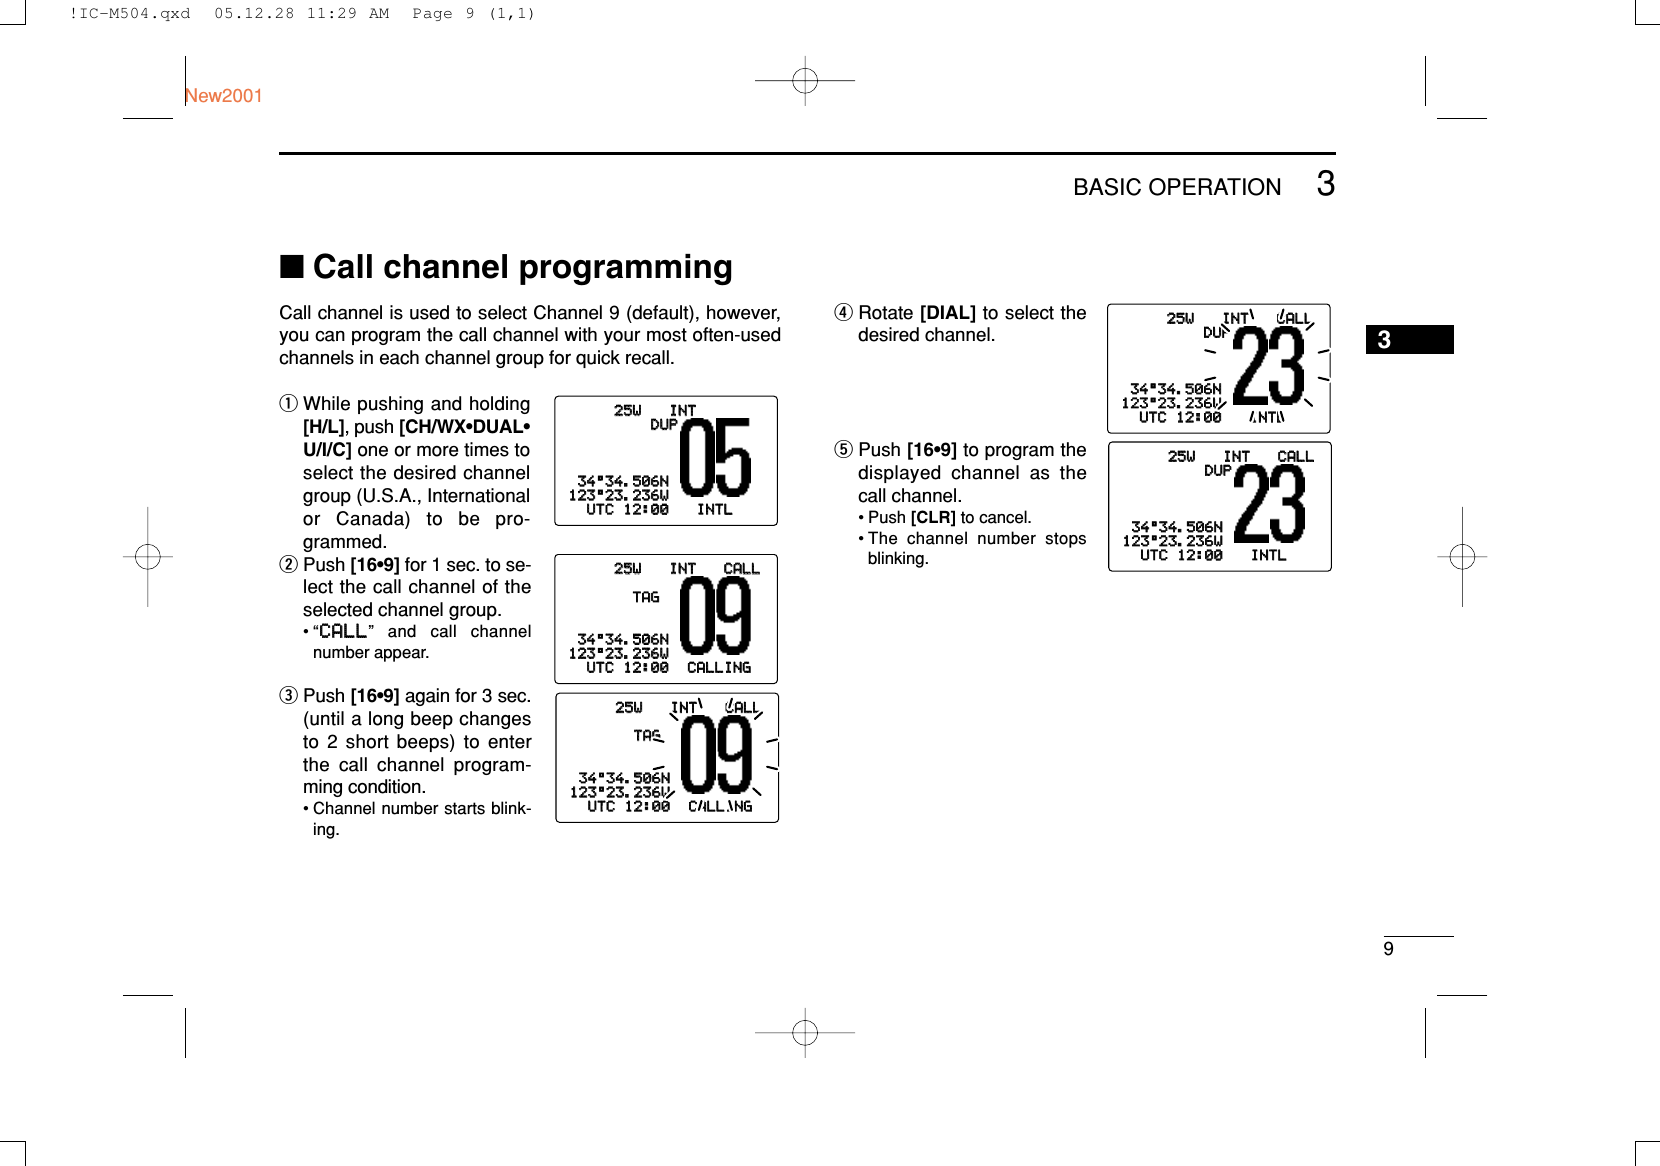 93BASIC OPERATIONNew20013■Call channel programmingCall channel is used to select Channel 9 (default), however,you can program the call channel with your most often-usedchannels in each channel group for quick recall.qWhile pushing and holding[H/L], push [CH/WX•DUAL•U/I/C] one or more times toselect the desired channelgroup (U.S.A., Internationalor Canada) to be pro-grammed.wPush [16•9] for 1 sec. to se-lect the call channel of theselected channel group.•“CCAALLLL” and call channelnumber appear.ePush [16•9] again for 3 sec.(until a long beep changesto 2 short beeps) to enterthe call channel program-ming condition.• Channel number starts blink-ing.rRotate [DIAL] to select thedesired channel.tPush [16•9] to program thedisplayed channel as thecall channel.• Push [CLR] to cancel.• The channel number stopsblinking.25W25W INTINTDUPDUP3434°34.506N34.506N123123°23.236W23.236WUTCUTC 1212:00:00 INTLINTL25W25W INTINT CALLCALLTAGTAG3434°34.506N34.506N123123°23.236W23.236WUTCUTC 1212:00:00 CALLINGCALLING25W25W INTINT CALLCALLTAGTAG3434°34.506N34.506N123123°23.236W23.236WUTCUTC 1212:00:00 CALLINGCALLING25W25W INTINT CALLCALLDUDUP3434°34.506N34.506N123123°23.236W23.236WUTCUTC 1212:00:00 INTLINTL25W25W INTINT CALLCALLDUPDUP3434°34.506N34.506N123123°23.236W23.236WUTCUTC 1212:00:00 INTLINTL!IC-M504.qxd  05.12.28 11:29 AM  Page 9 (1,1)